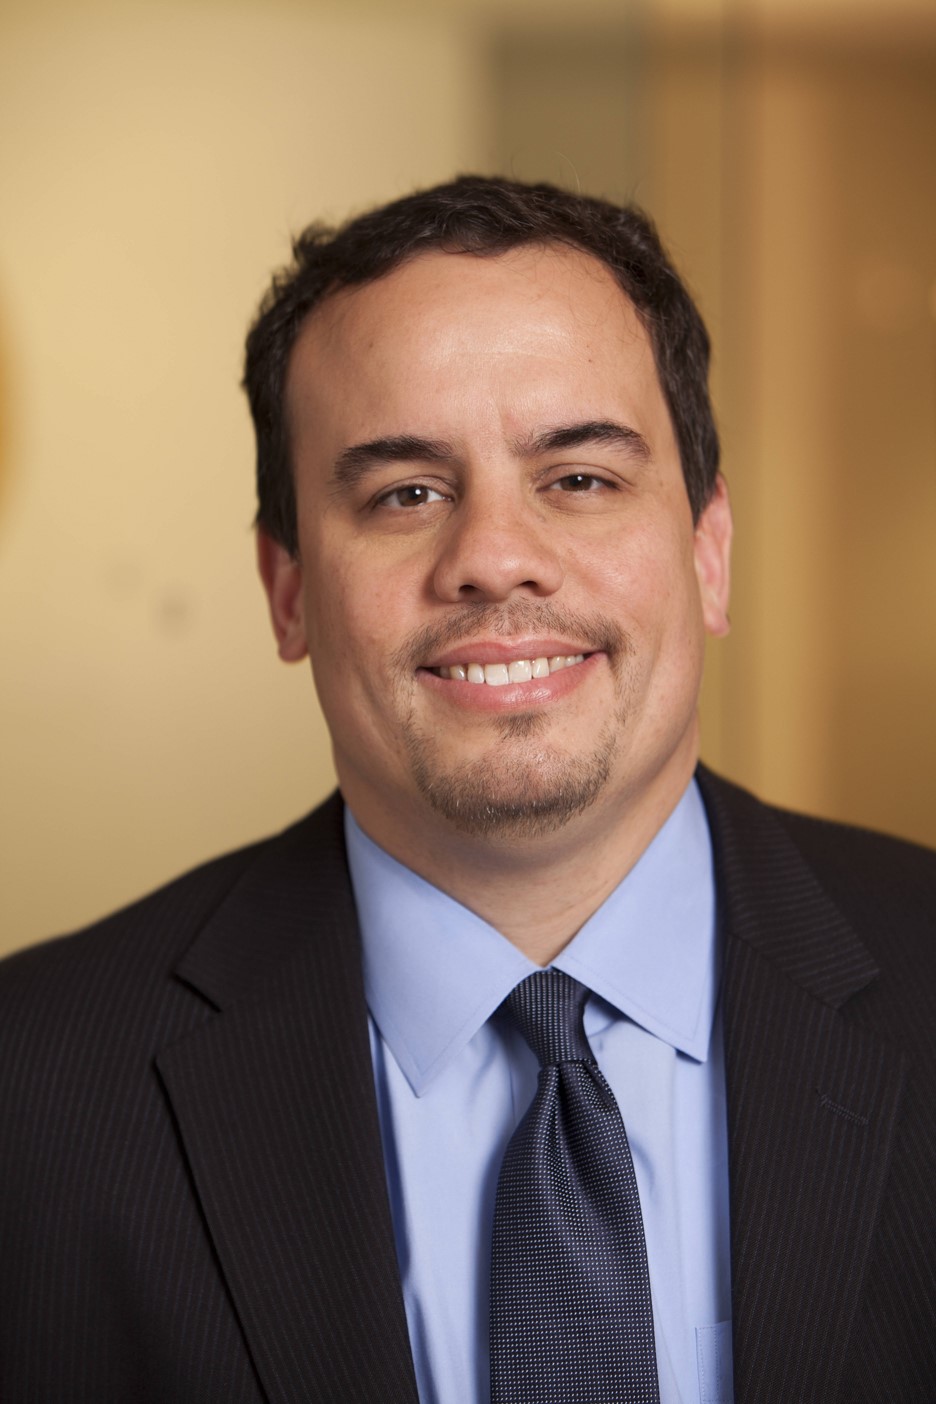 A headshot shows Ray Rodriguez in a suit.